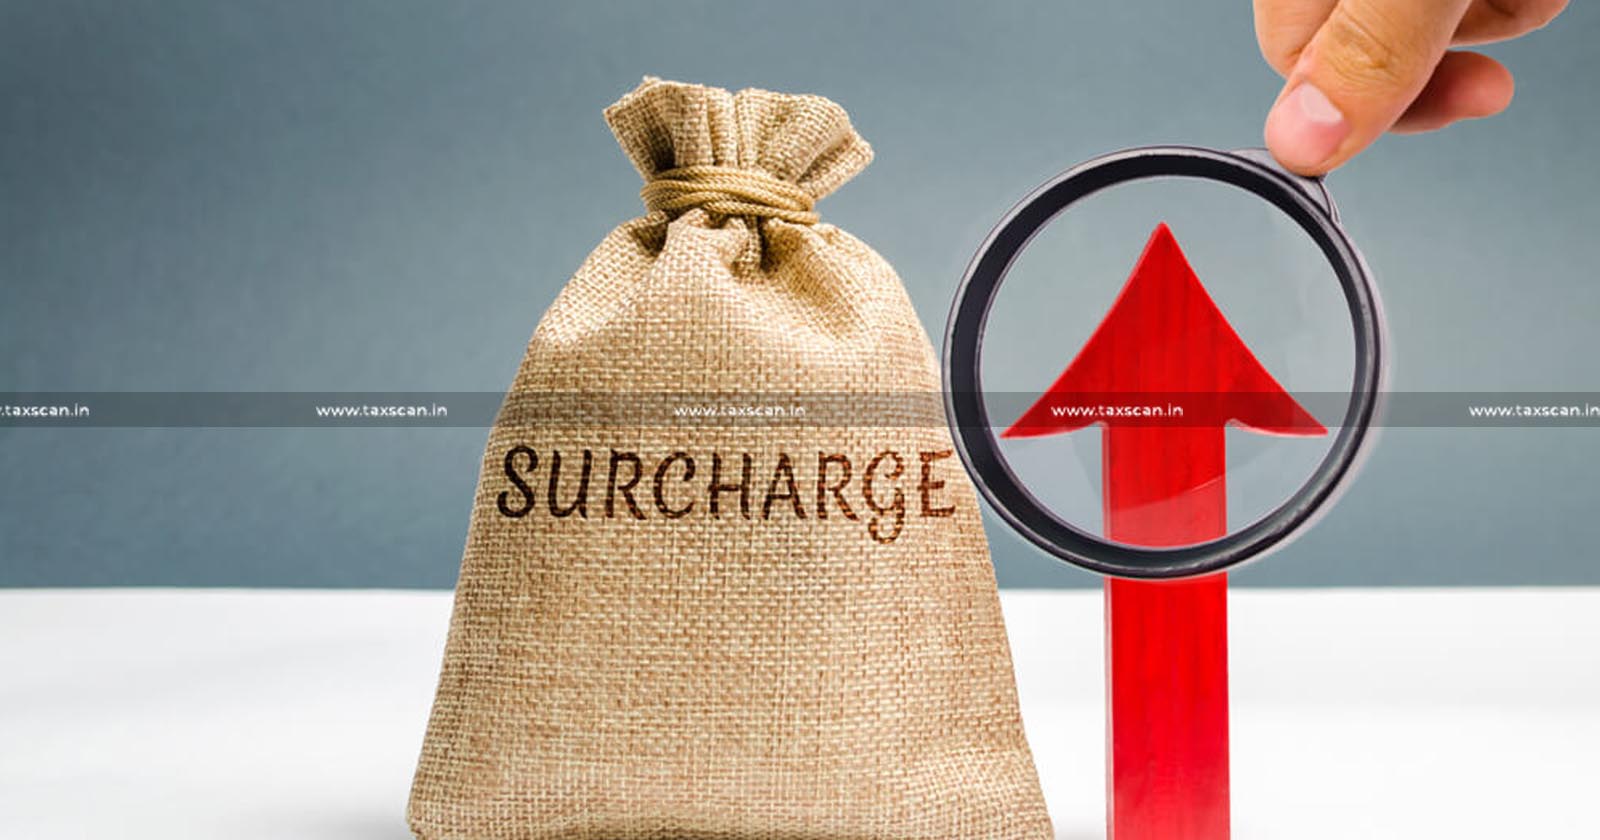 Levy - Surcharge - Cess - Levy of Surcharge - Levy of Surcharge and Cess - Tax Rate - India – Japan DTAA - DTAA - ITAT - Taxscan